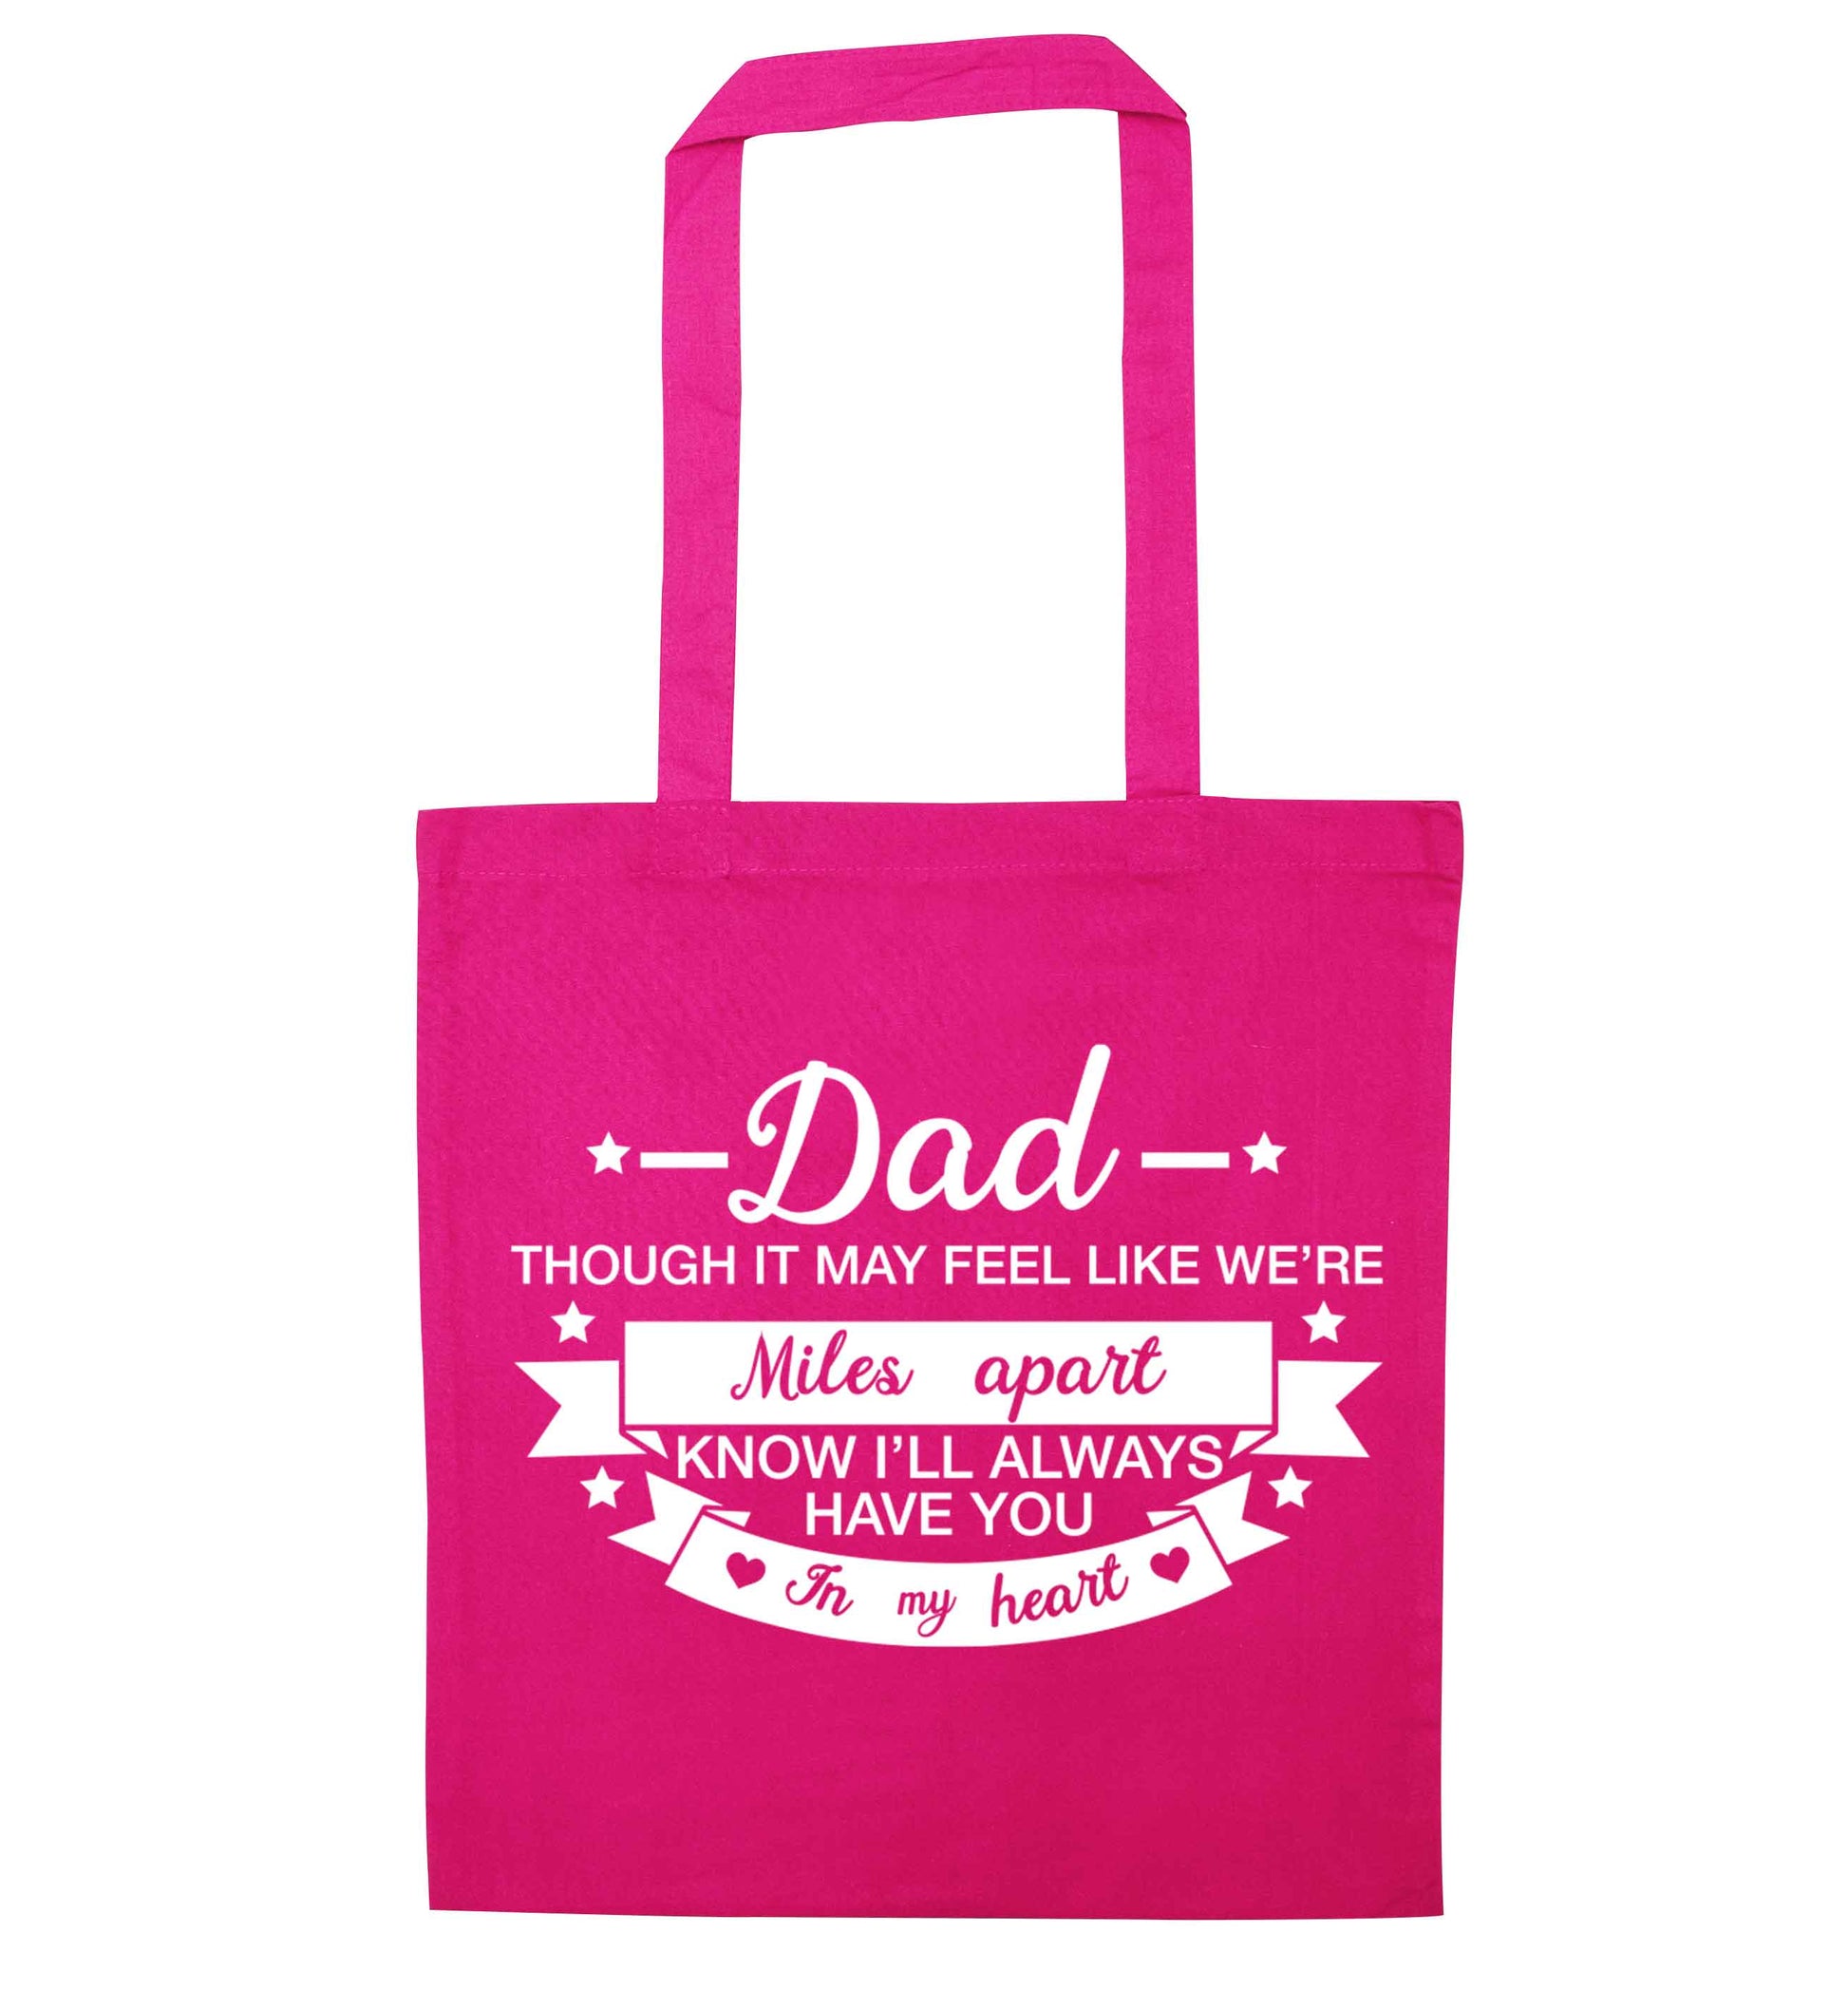 Dad though it may feel like we're miles apart know I'll always have you in my heart pink tote bag